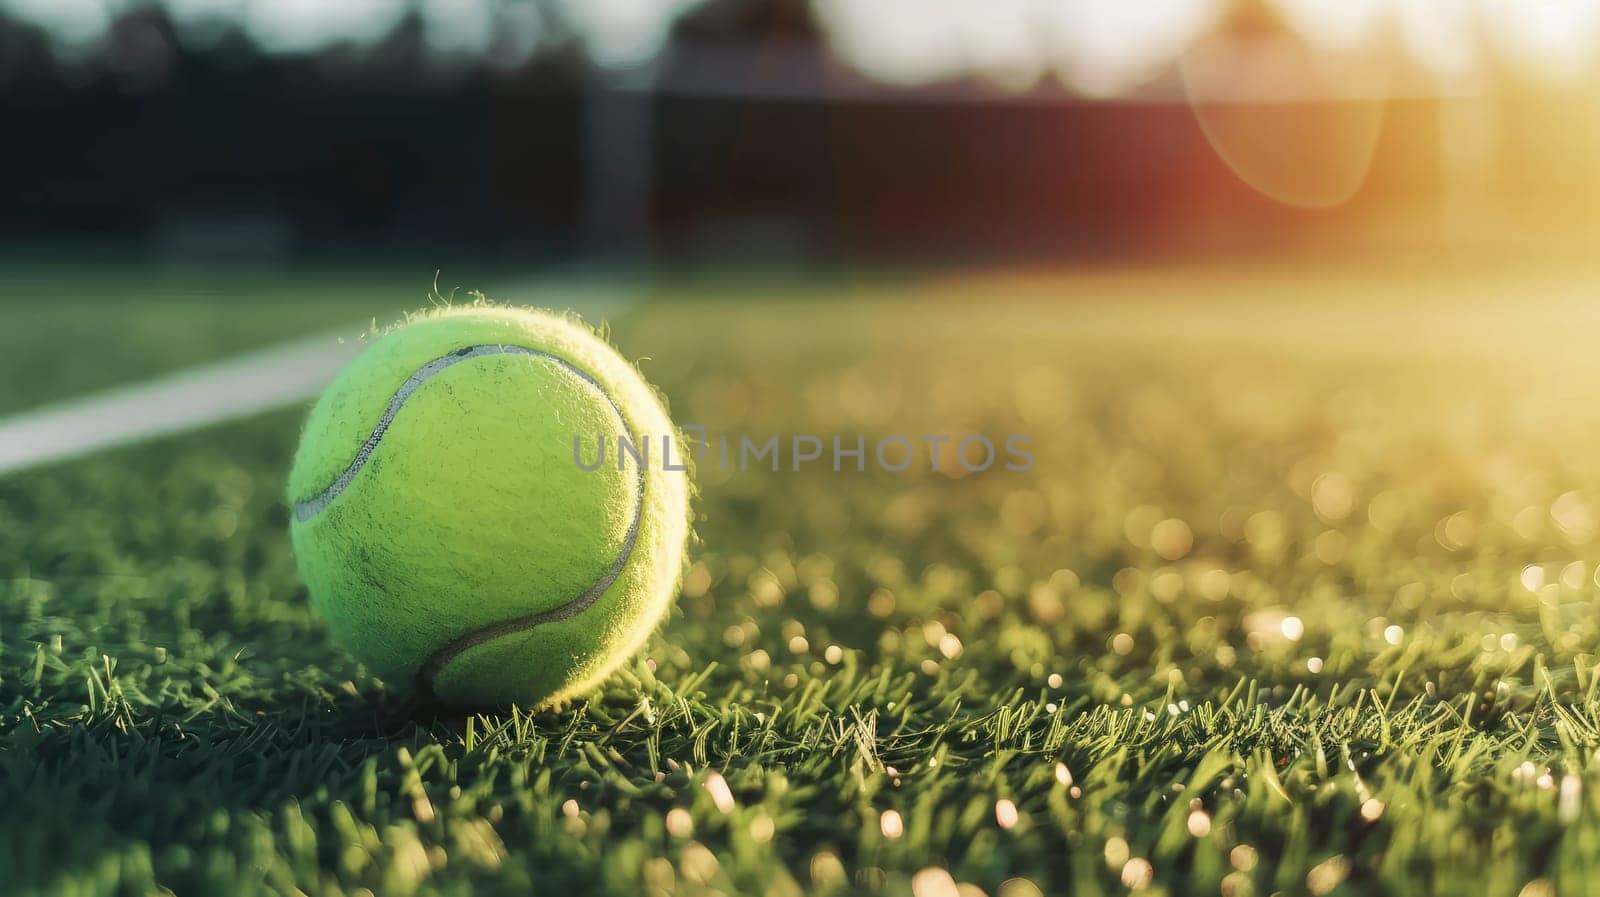 Tennis ball on tennis clay court with copy space for text, Sport and healthy lifestyle wallpaper or background.